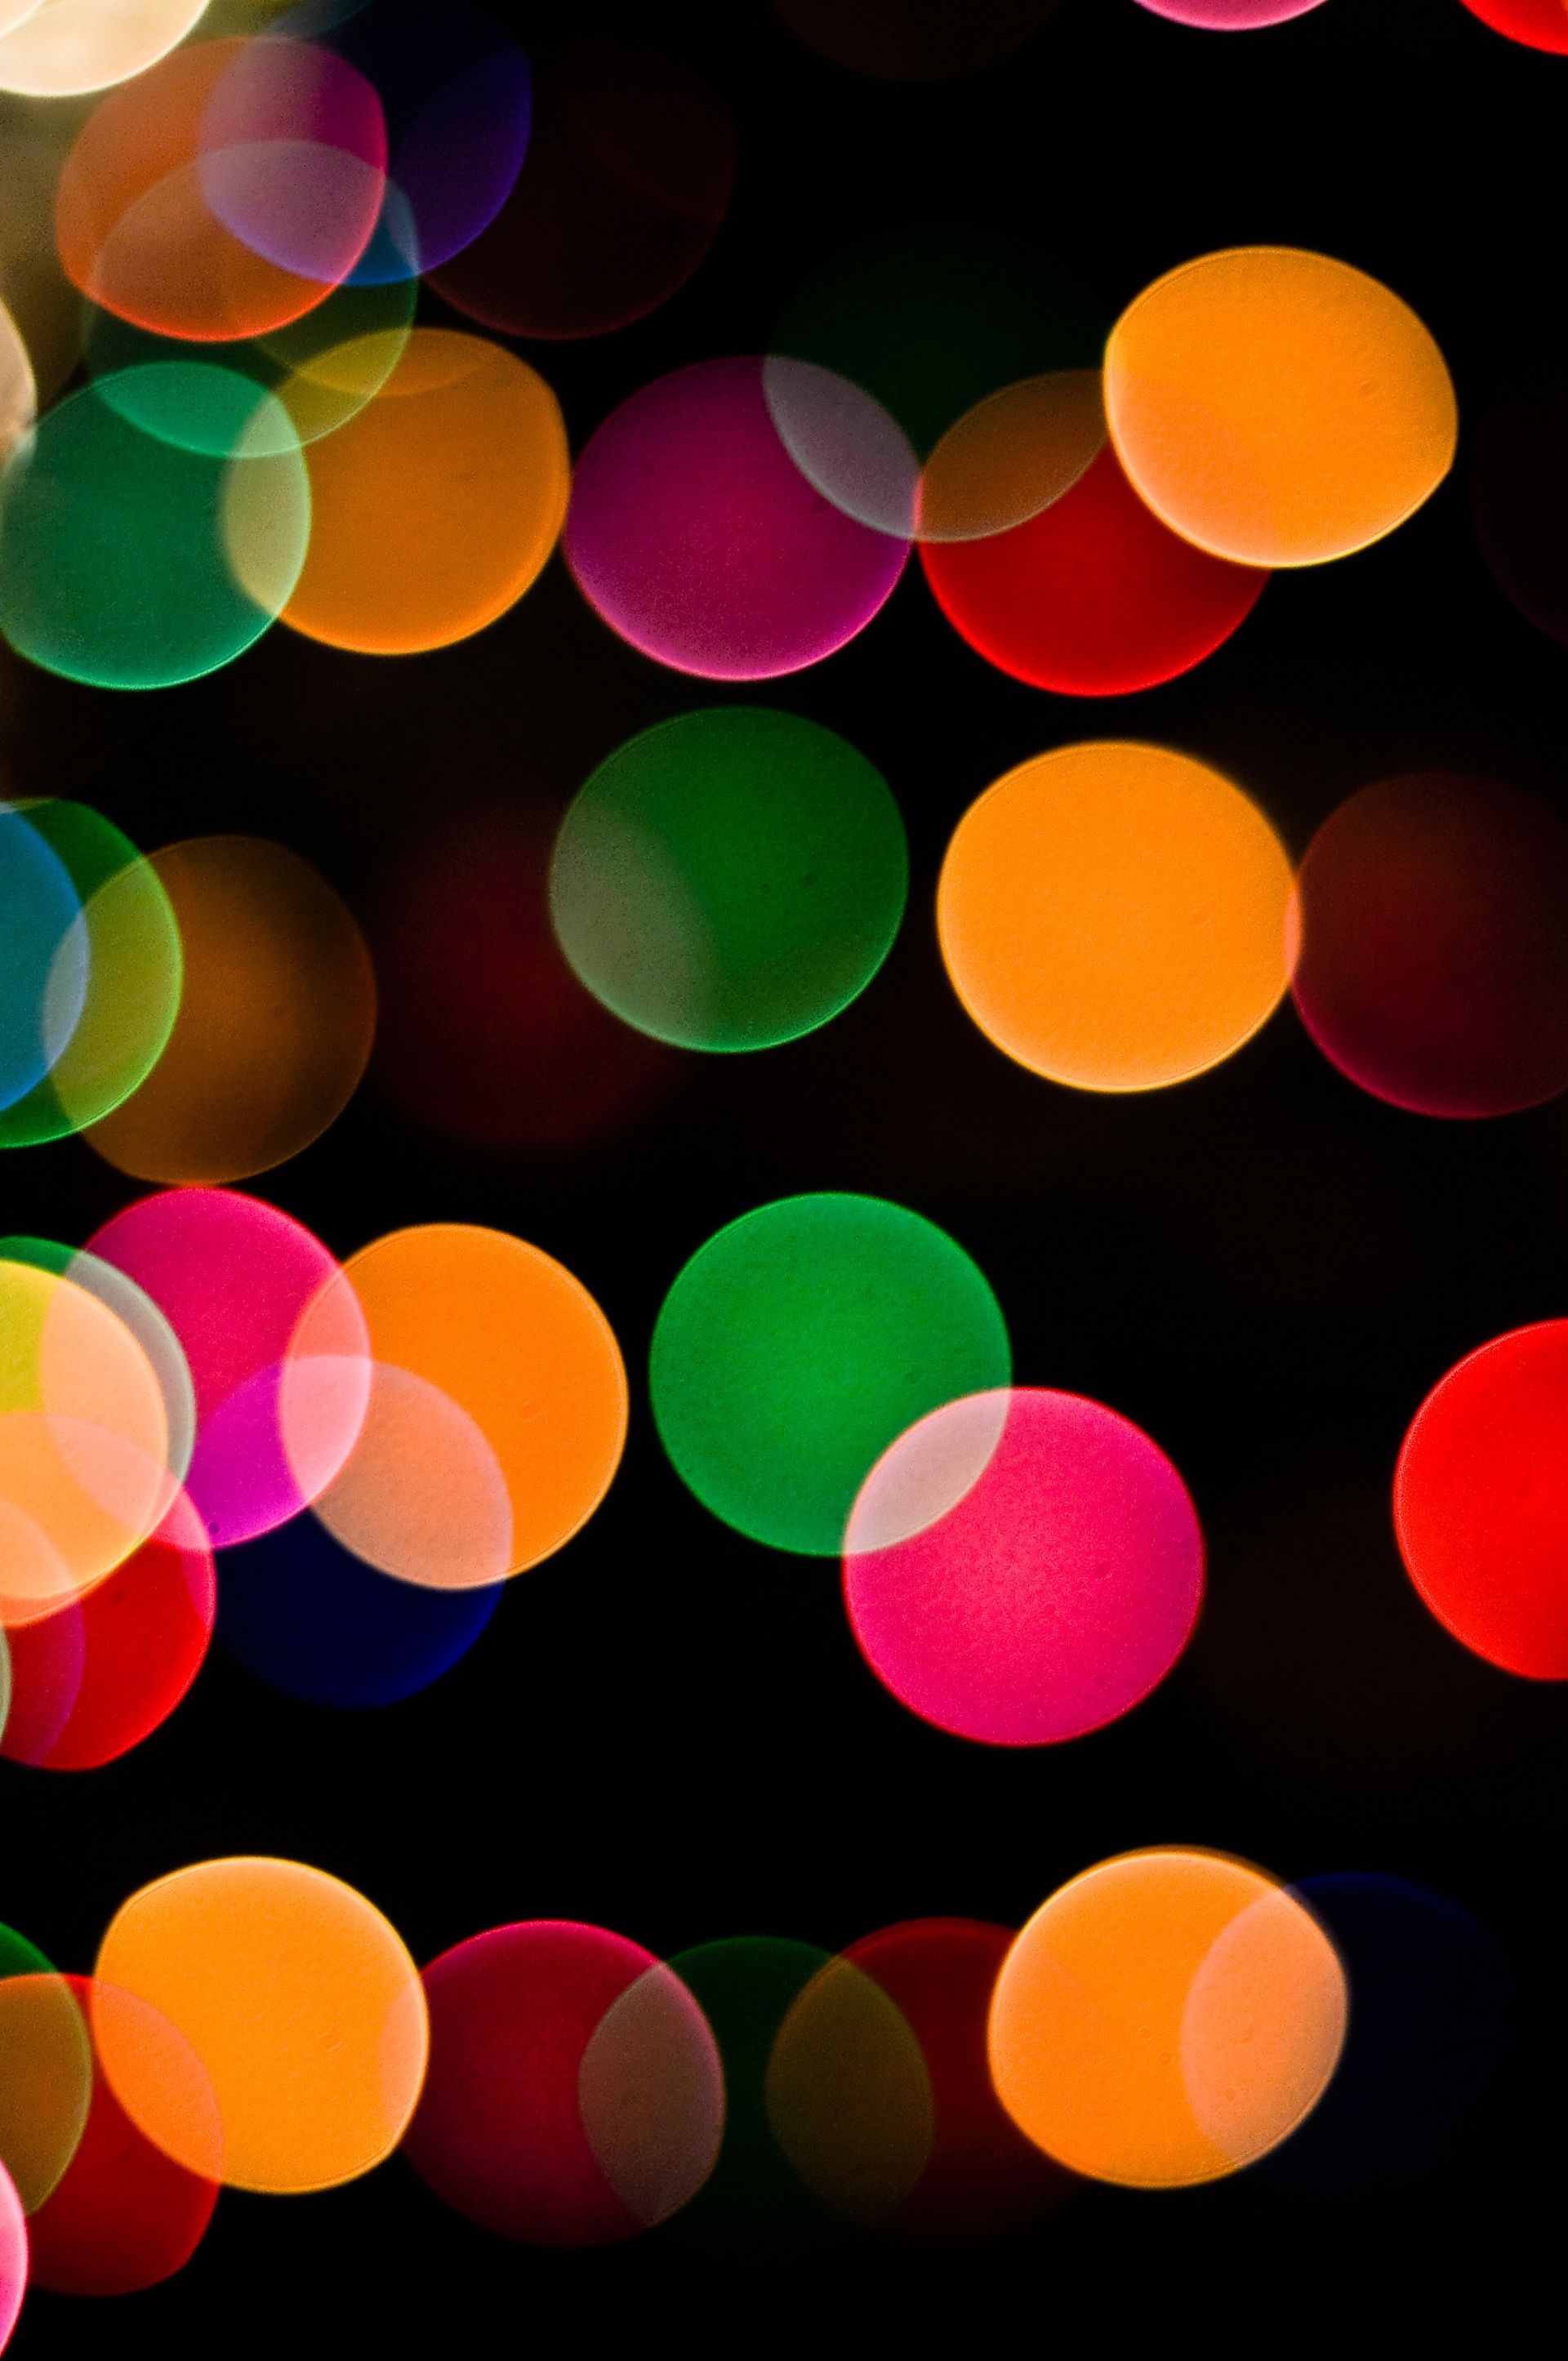 Several different colors of lights blurred out into circles on a dark background.